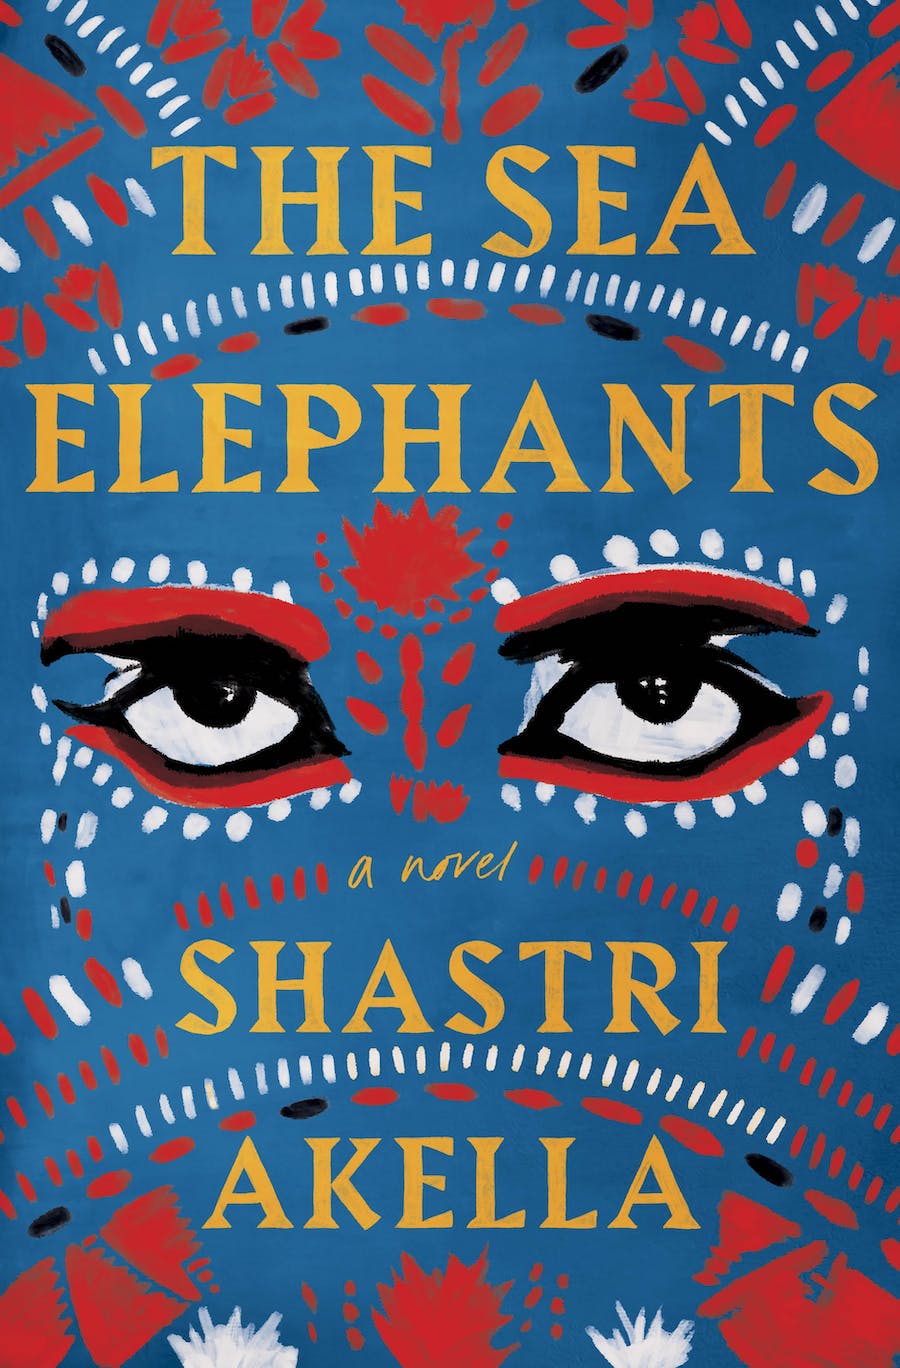 cover of The Sea Elephants by Shastri Akella